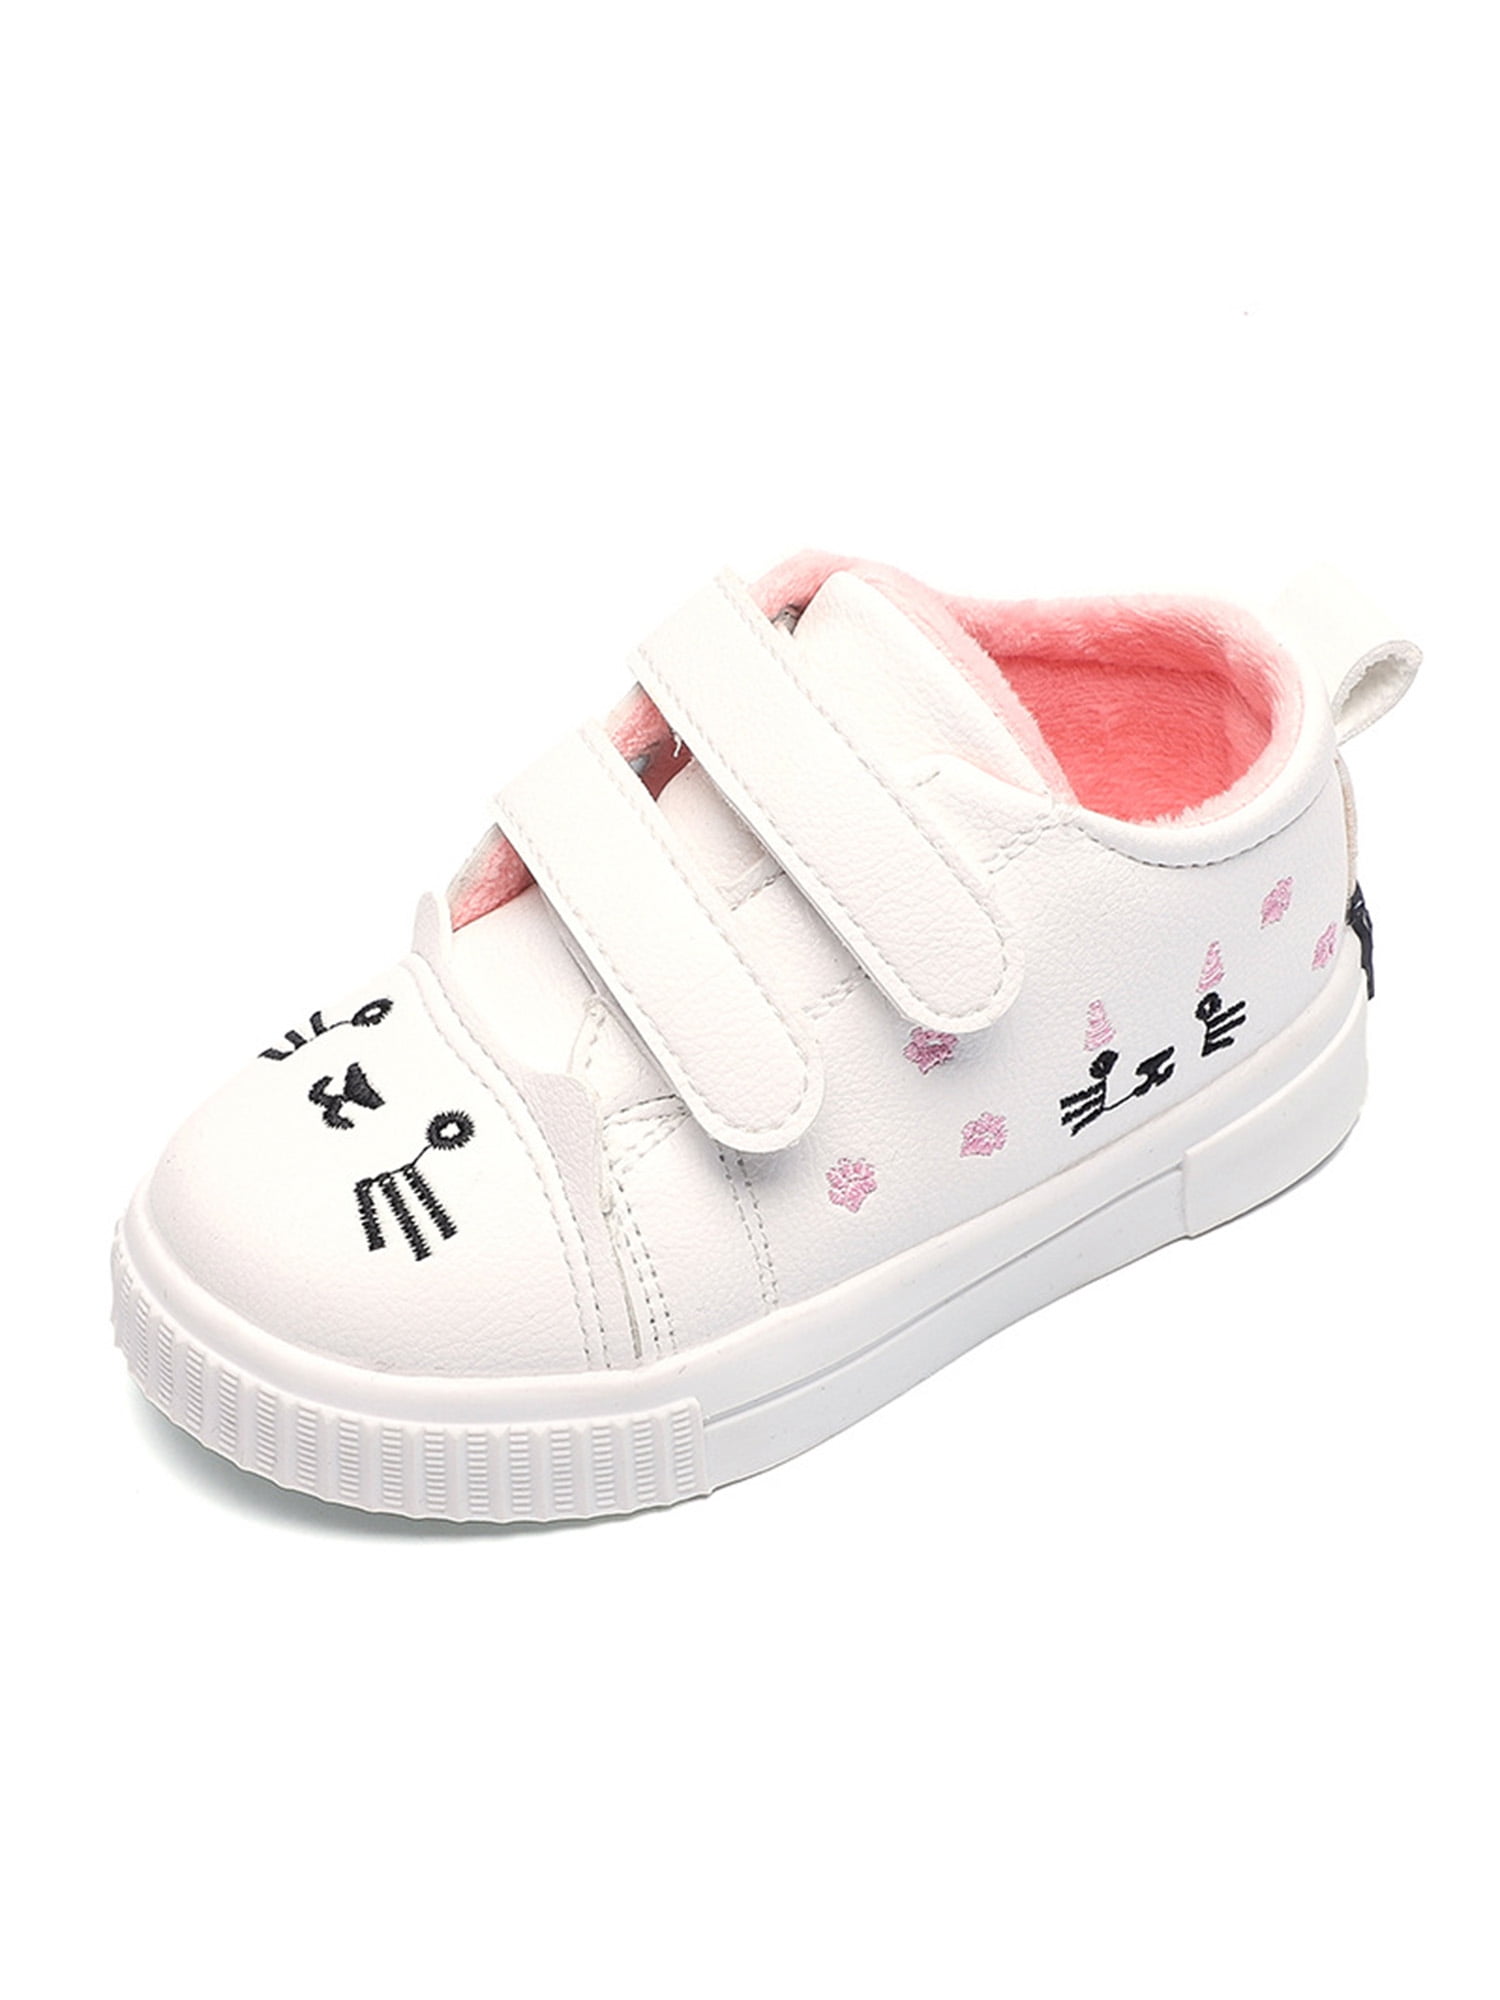 Classic Canvas Shoes Action Cartoon Cute Big Cats On Canvas Slip-on Casual Printing Comfortable Low Top Canvas Shoes Boys